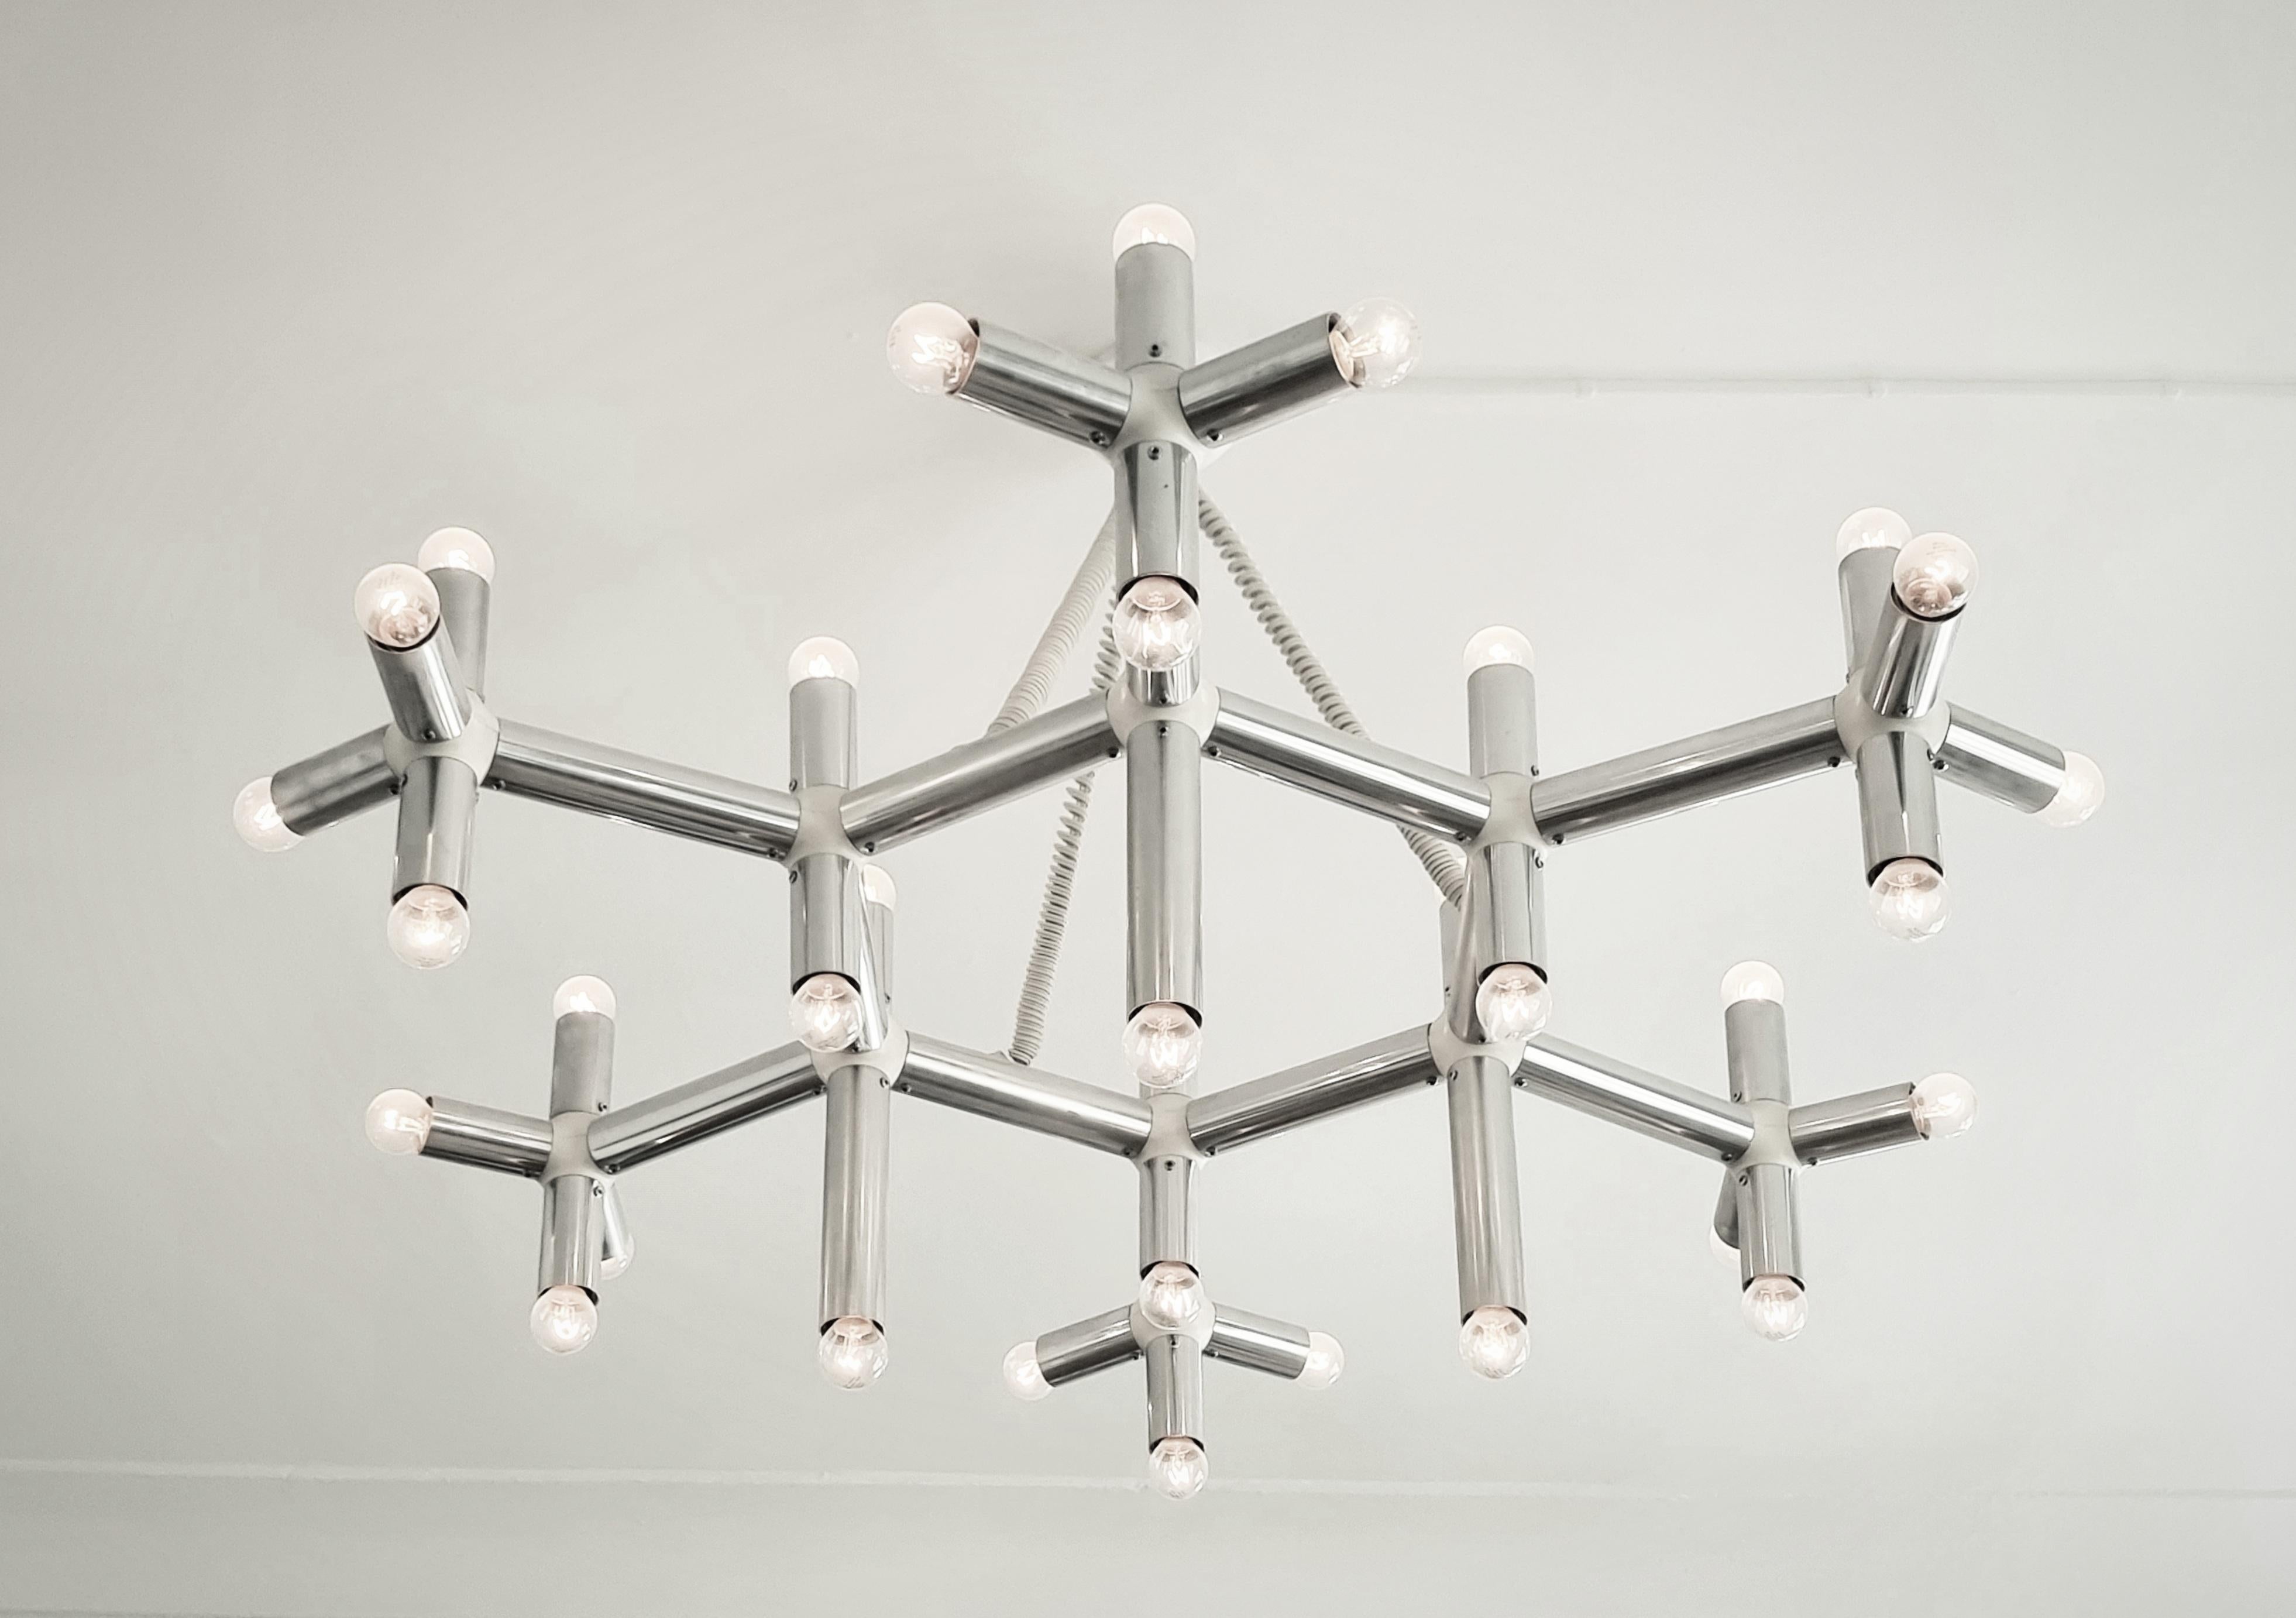 Stylish large chandelier /ceiling lamp, model Atomic. In beautiful condition. Designed by Trix & Robert Haussmann, made for Swiss Lamps, 1960/70s.

Base in aluminium and white plastic. Adjustable height. In good condition, few signs of age and wear.